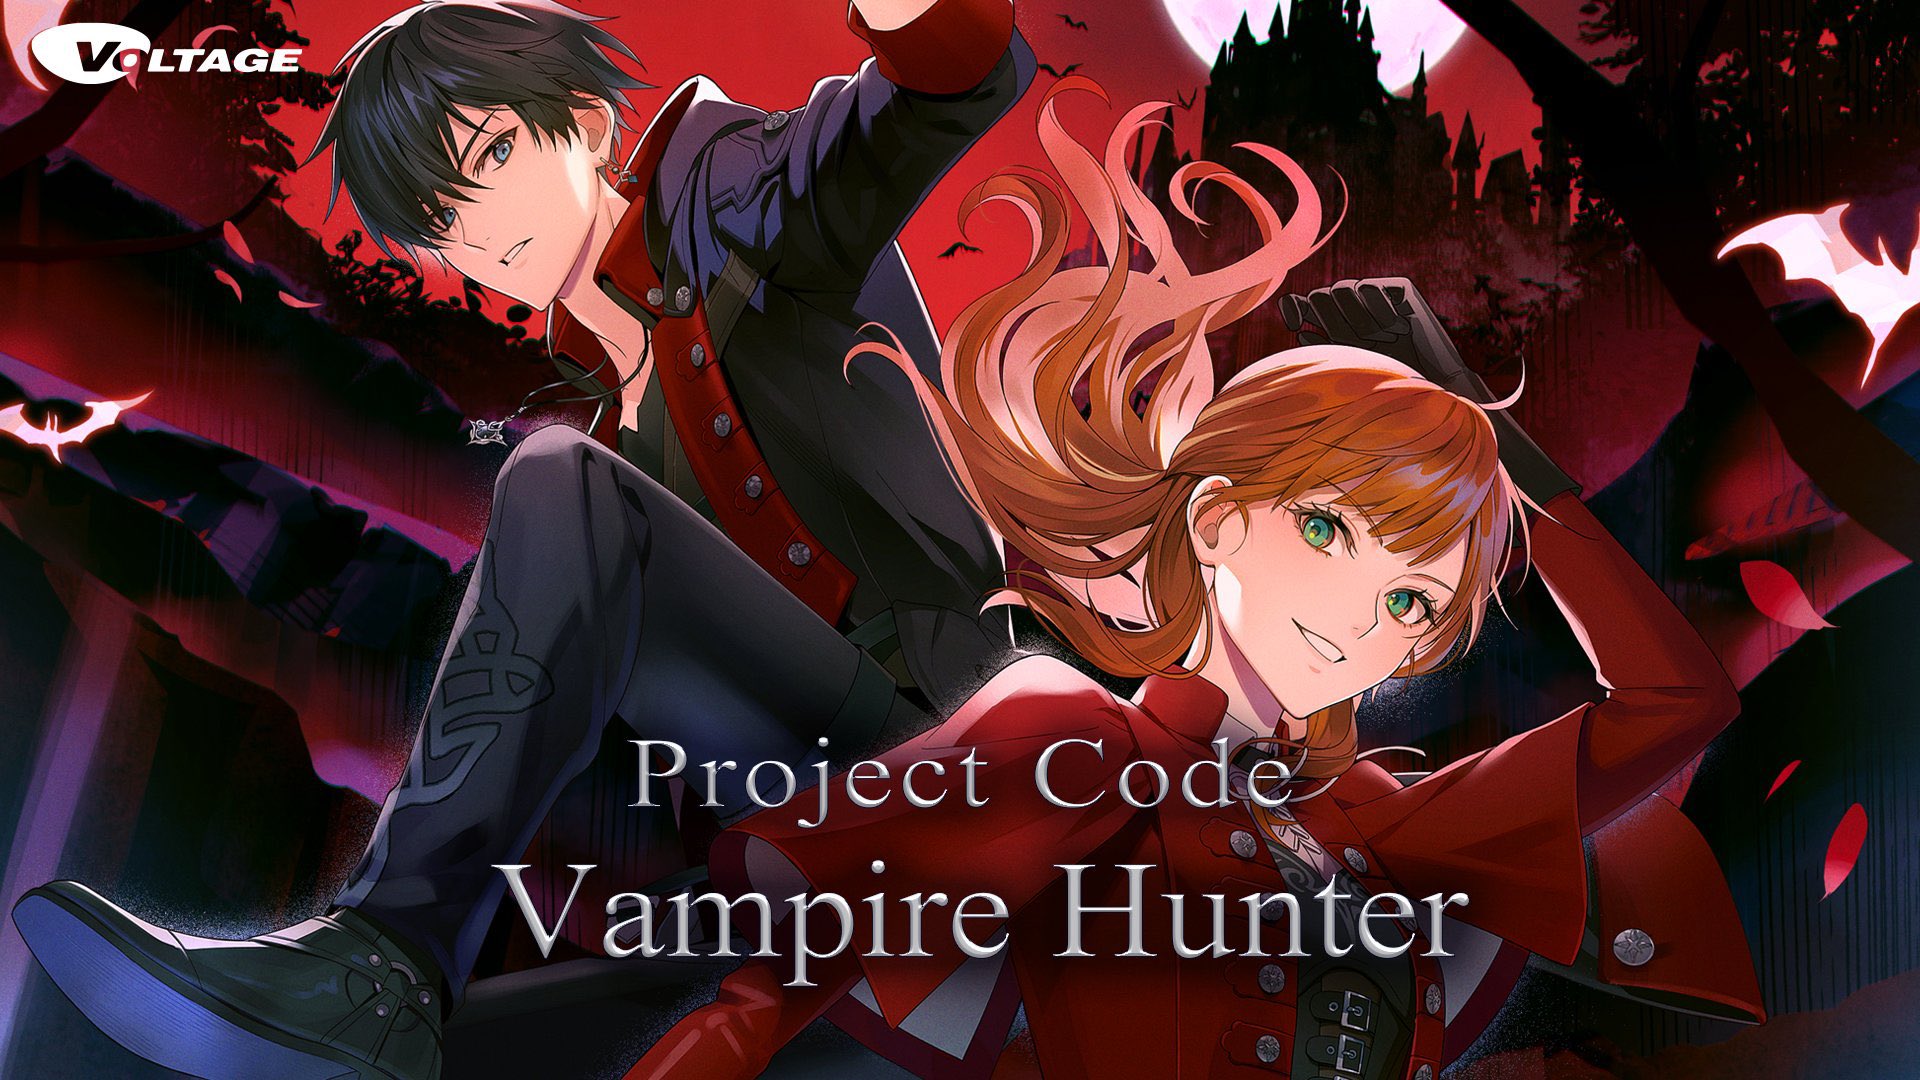 otomeaddicted❀ on X: New otome game “Project Code: Vampire Hunter” is  going to be released in 2025!  / X